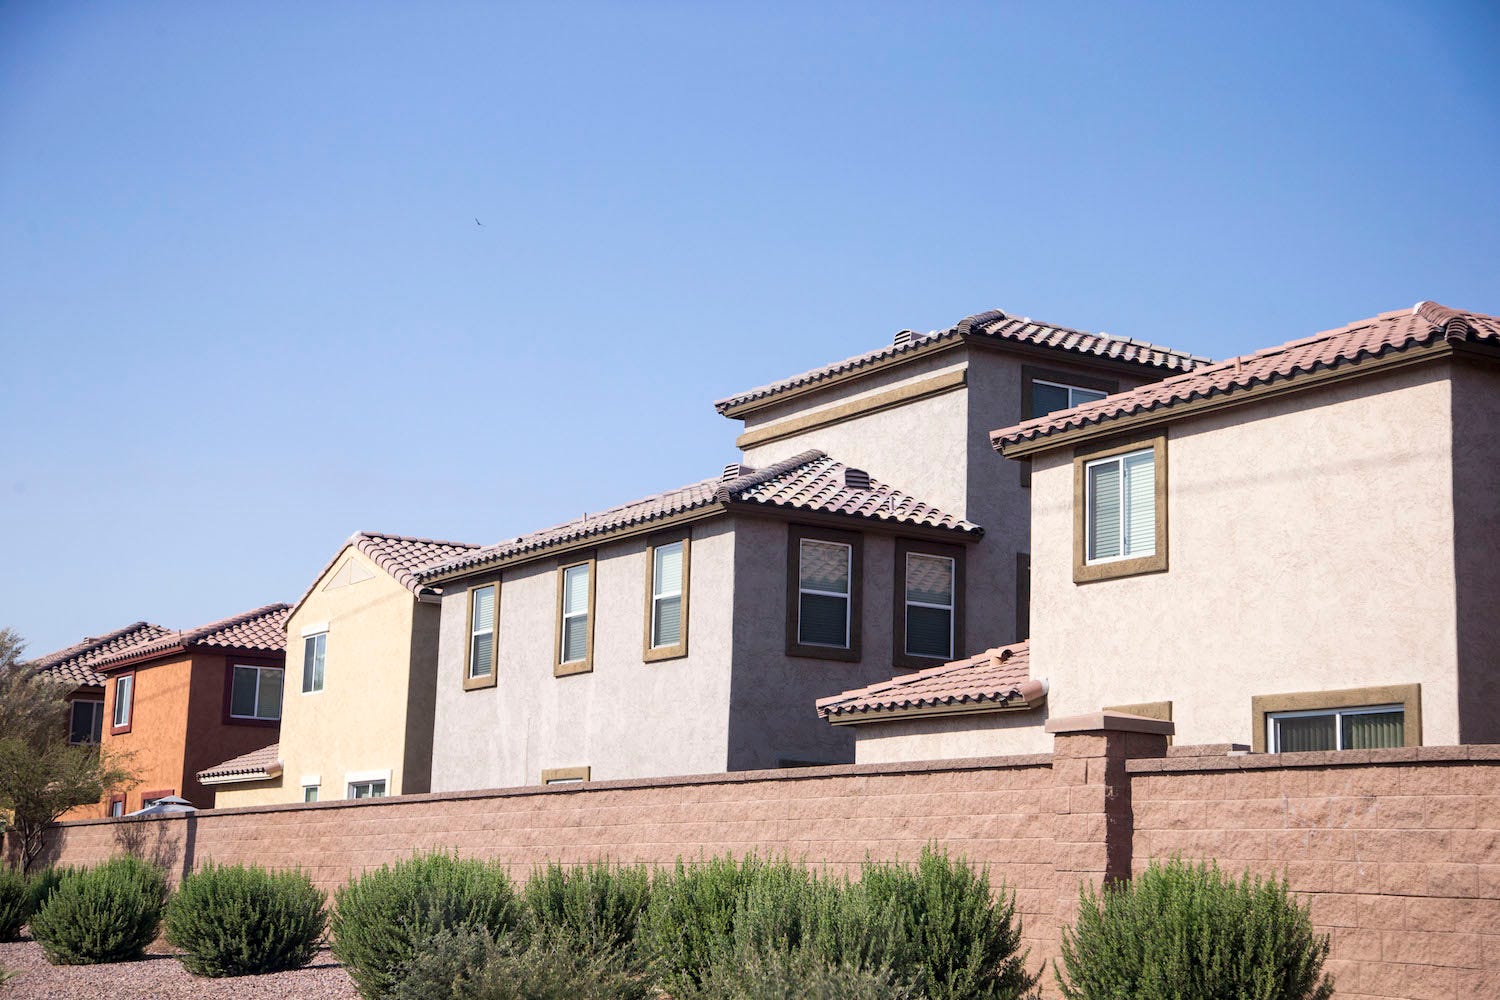 The Phoenix neighborhood of Maryvale (ZIP code 85035) saw the biggest resale home price increases since the housing crash (2011-18) -- $40,000 to $171,800, 
 a 330% increase.